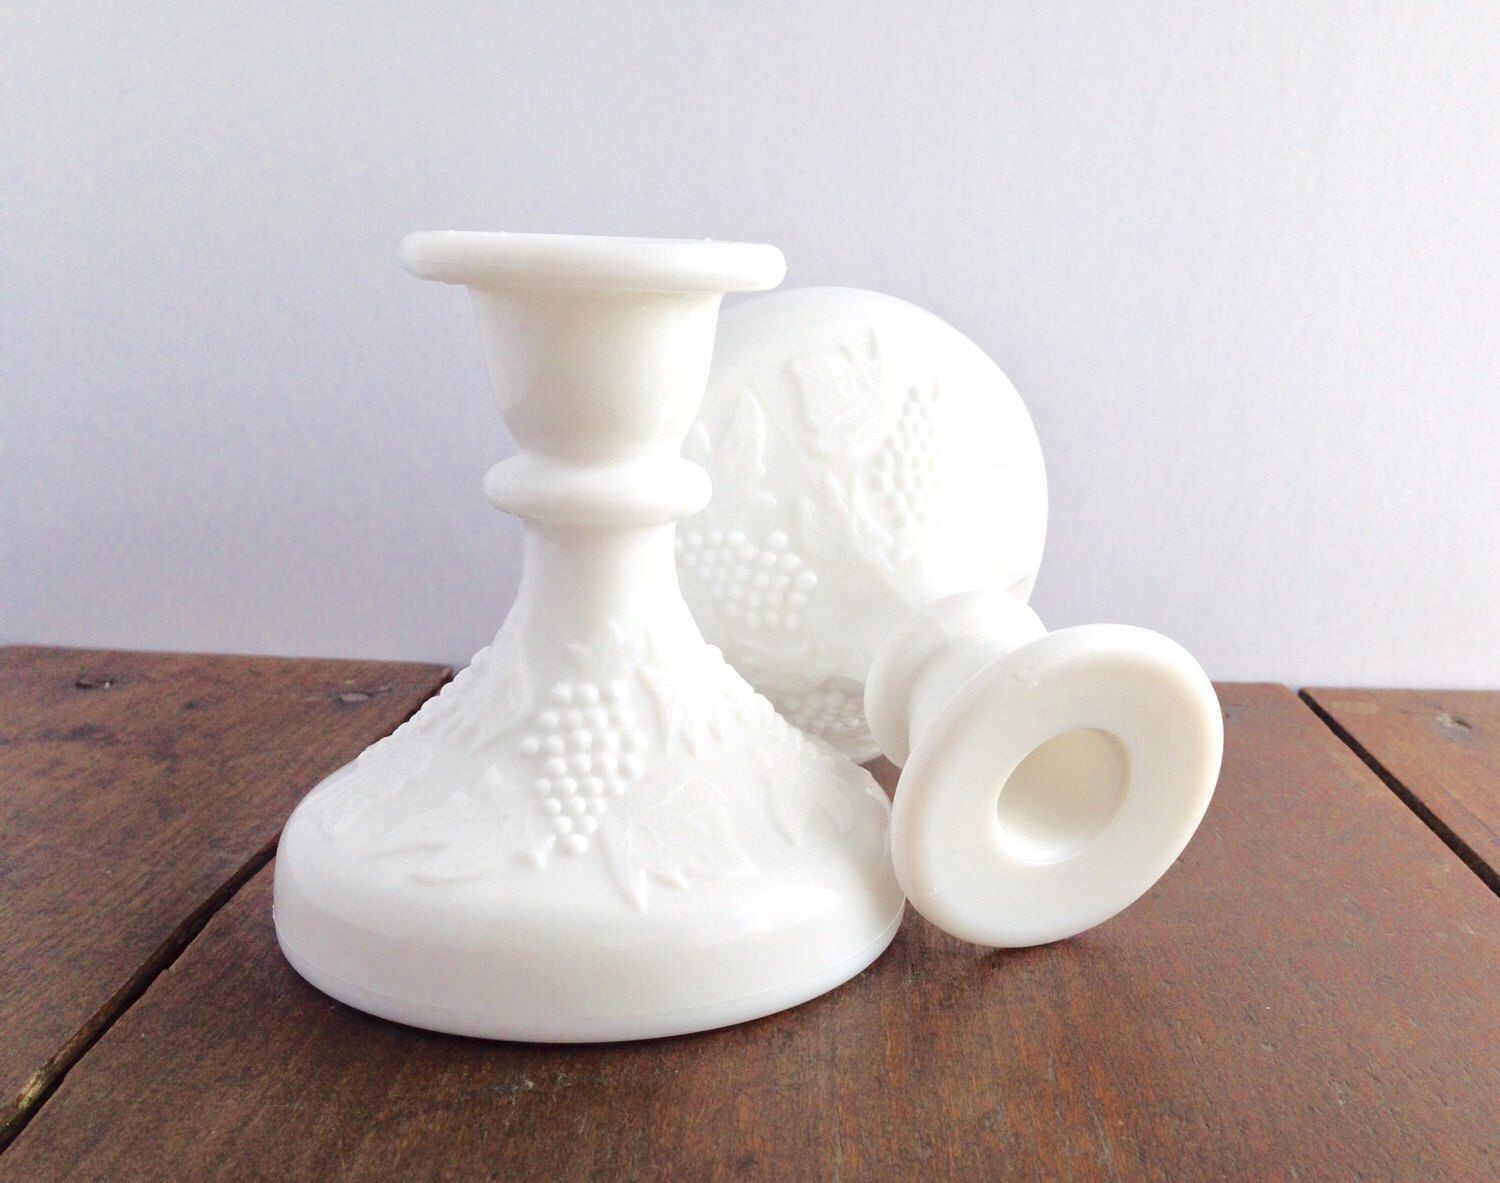 20 Fabulous Antique White Milk Glass Vases 2024 free download antique white milk glass vases of milk glass candle holders sale two vintage milk glass vintage with regard to milk glass candle holders sale two vintage milk glass vintage candle holders wh